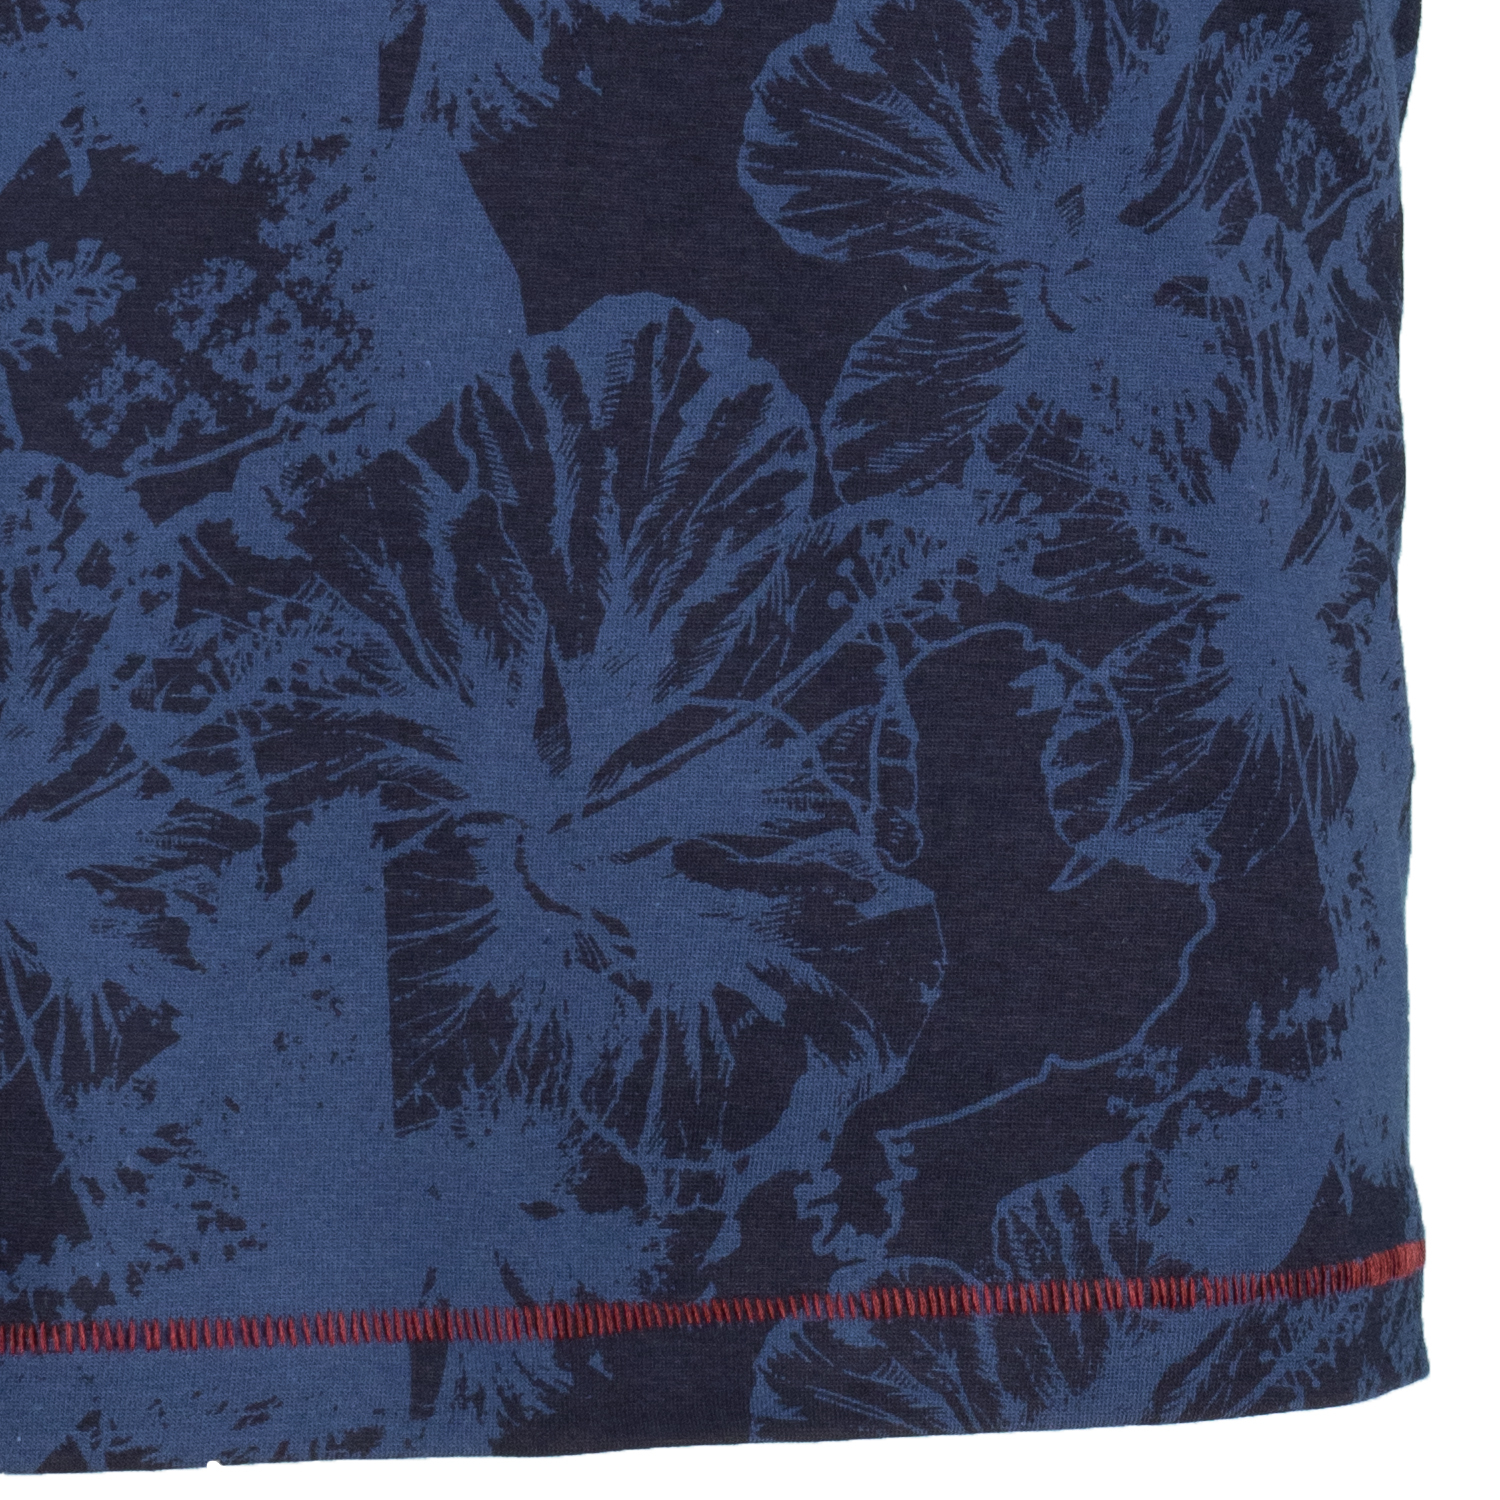 Patterned T-shirt with print and embroidery in navy by ADAMO series TROPICAL up to oversize 10XL